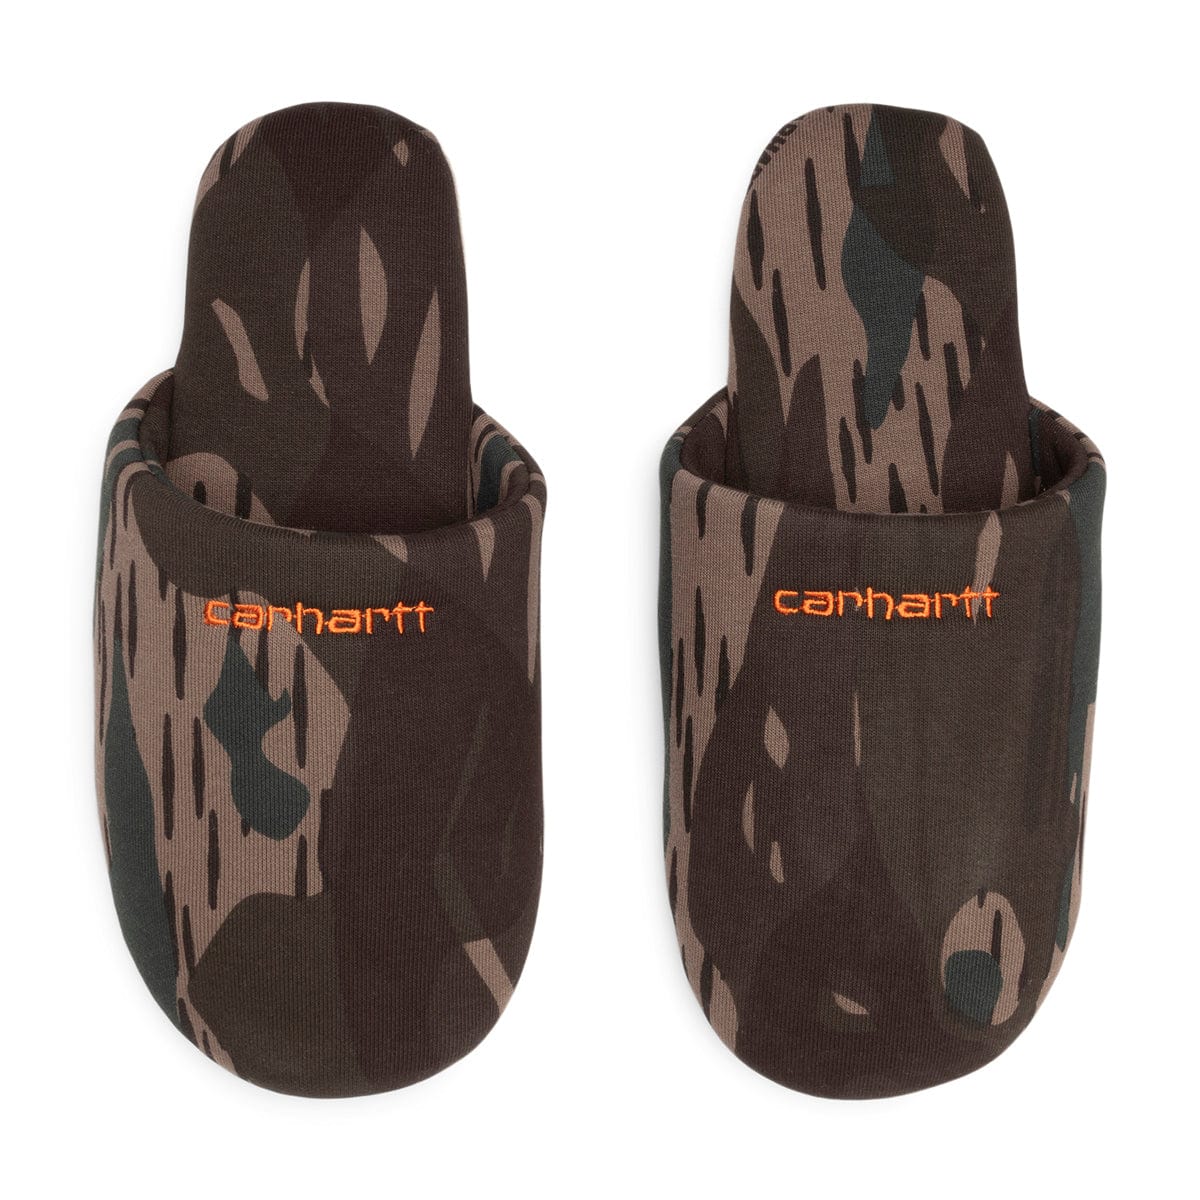 Carhartt WIP Sandals CAMO/COPPERTON / M SCRIPT EMBROIDERY SLIPPERS